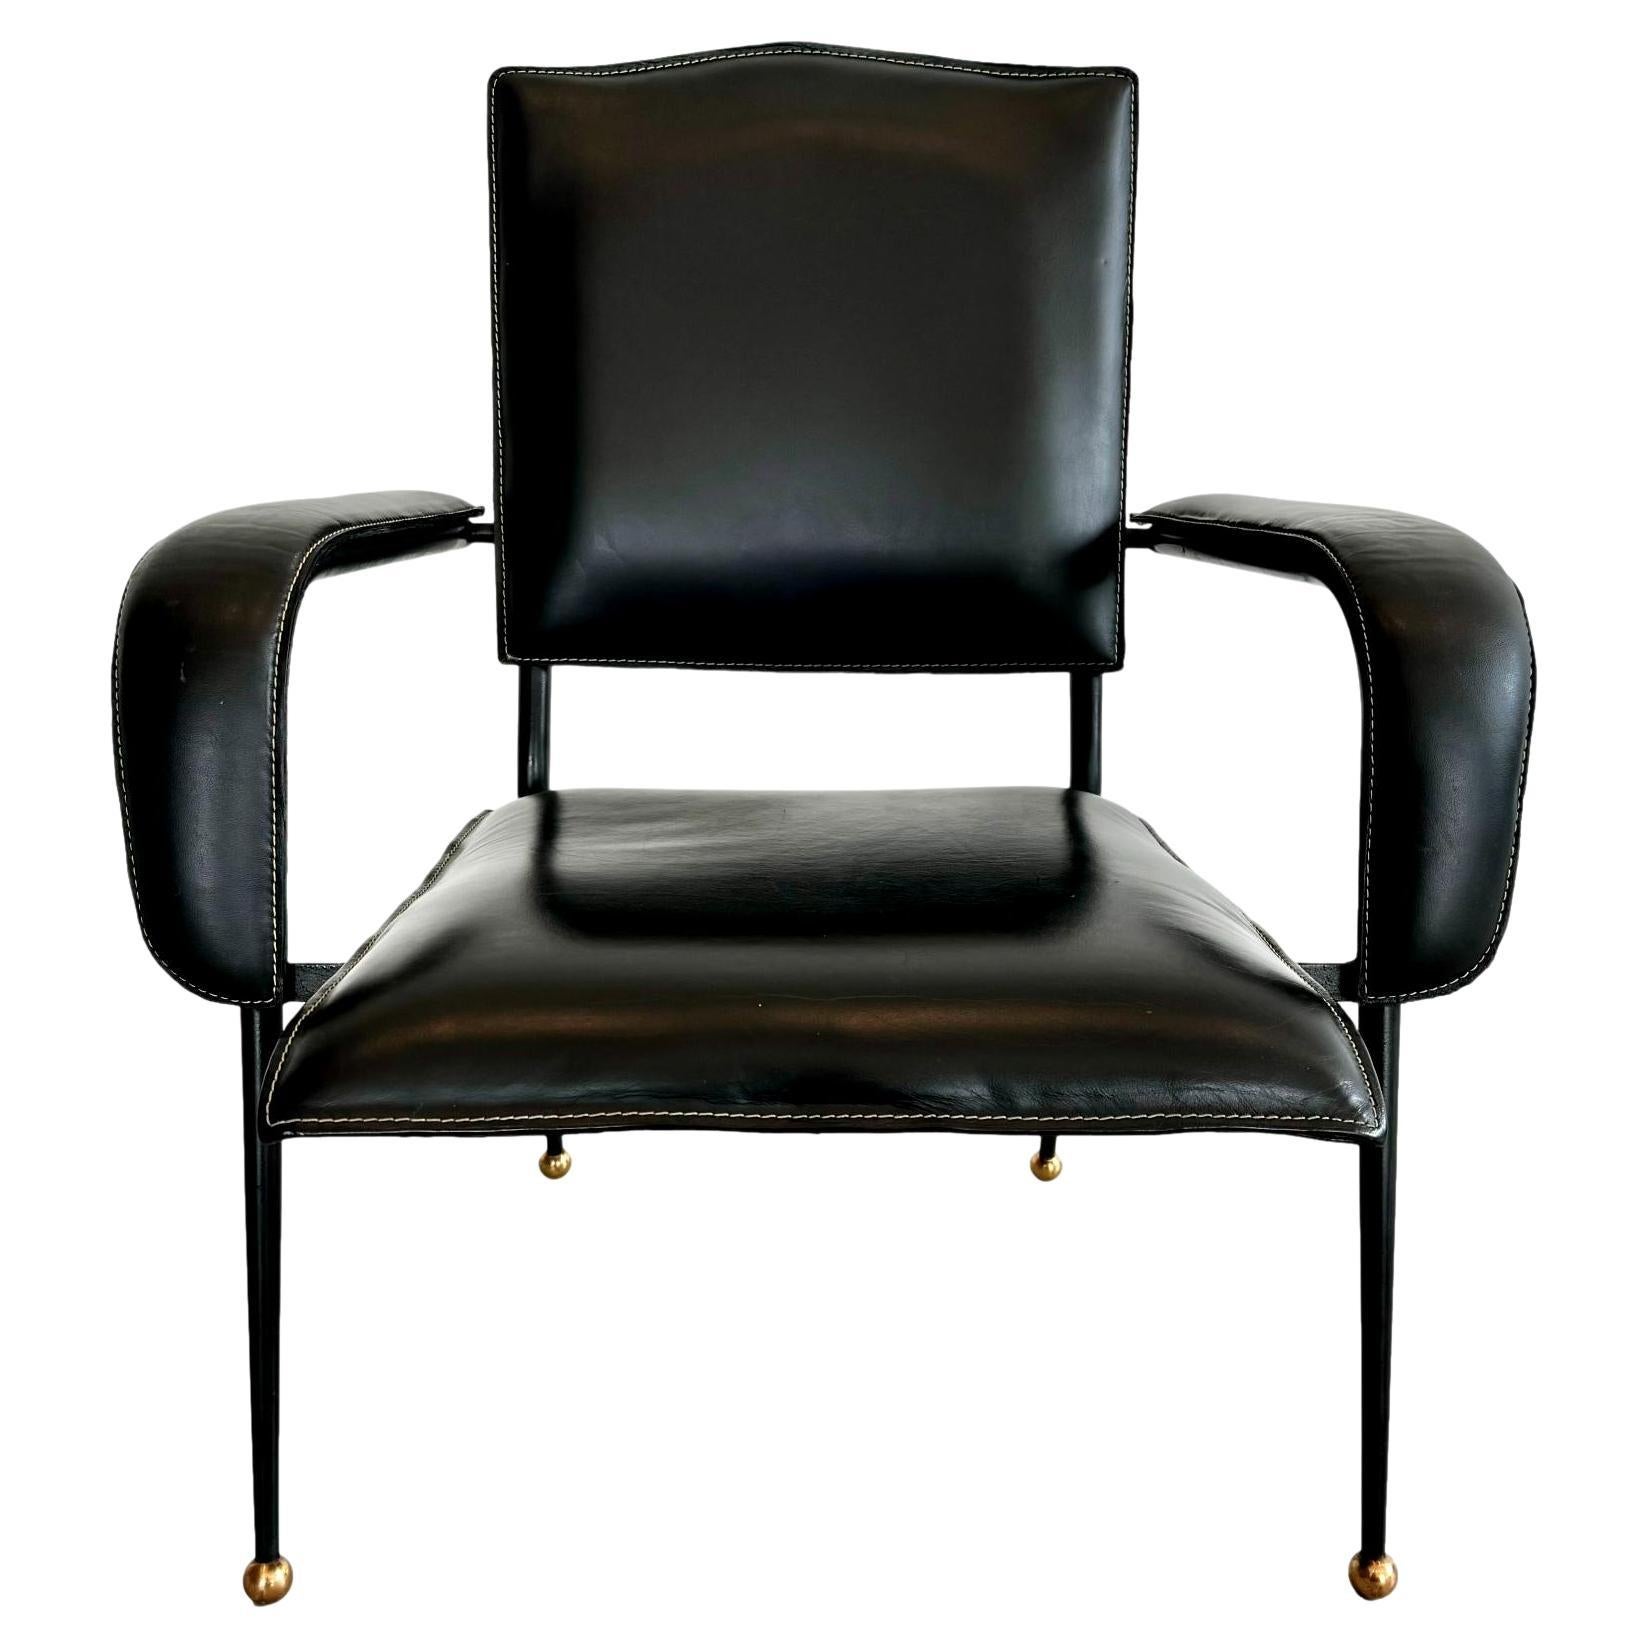 Jacques Adnet Black Leather Armchair, 1950s France For Sale